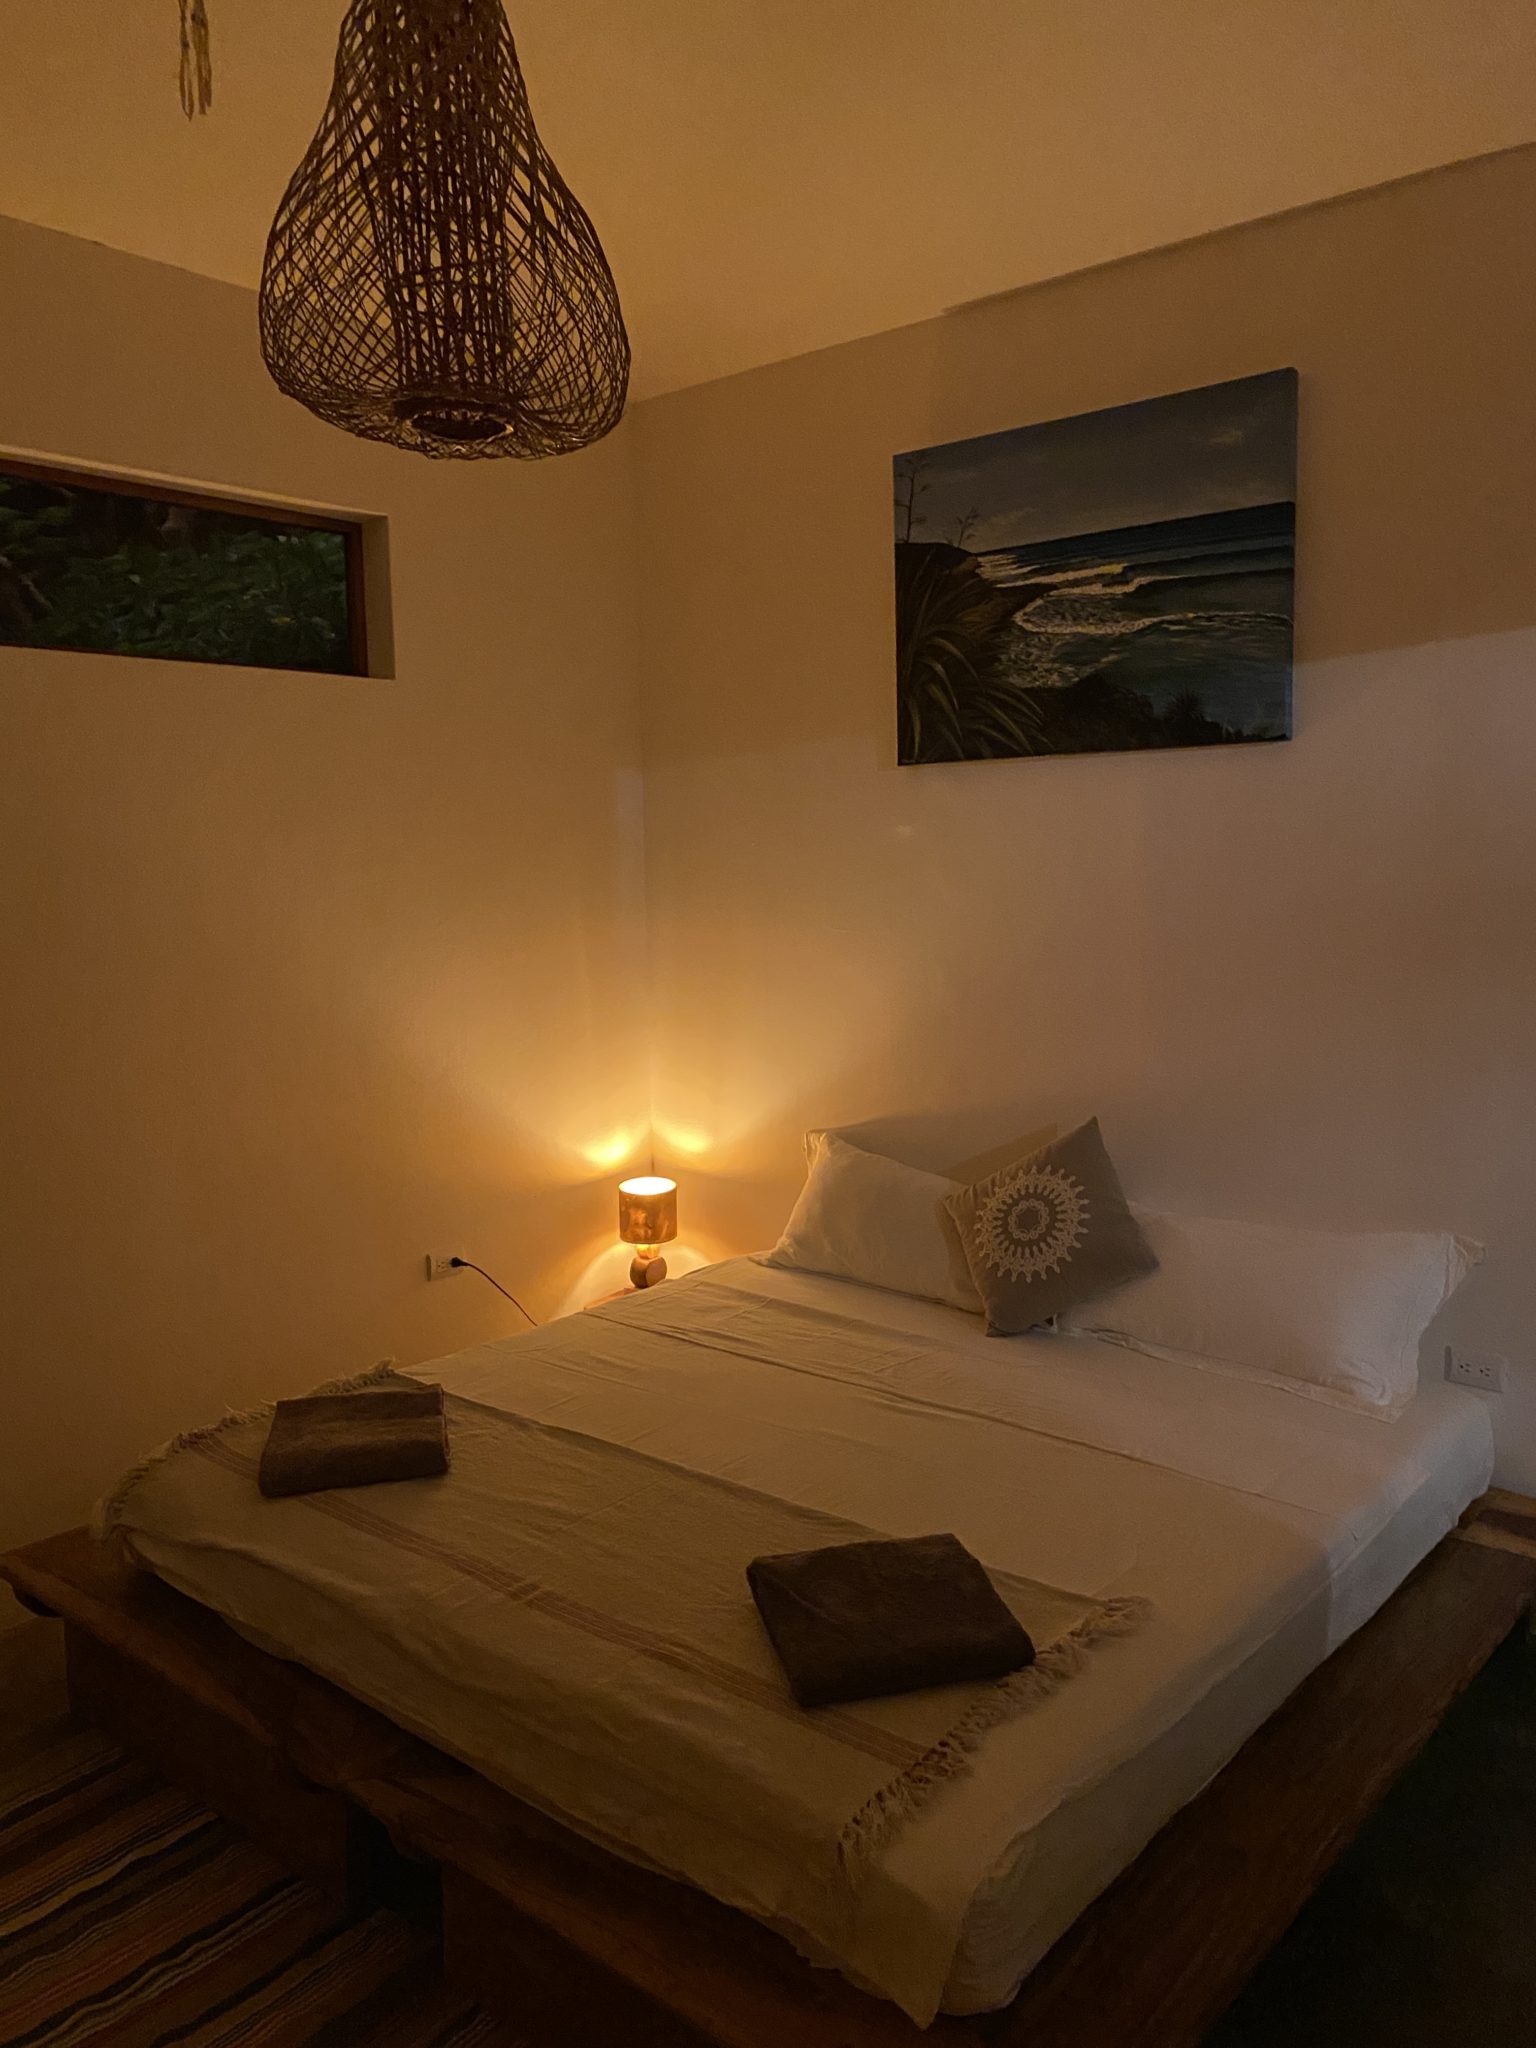 A bed in surf resort with light open at night